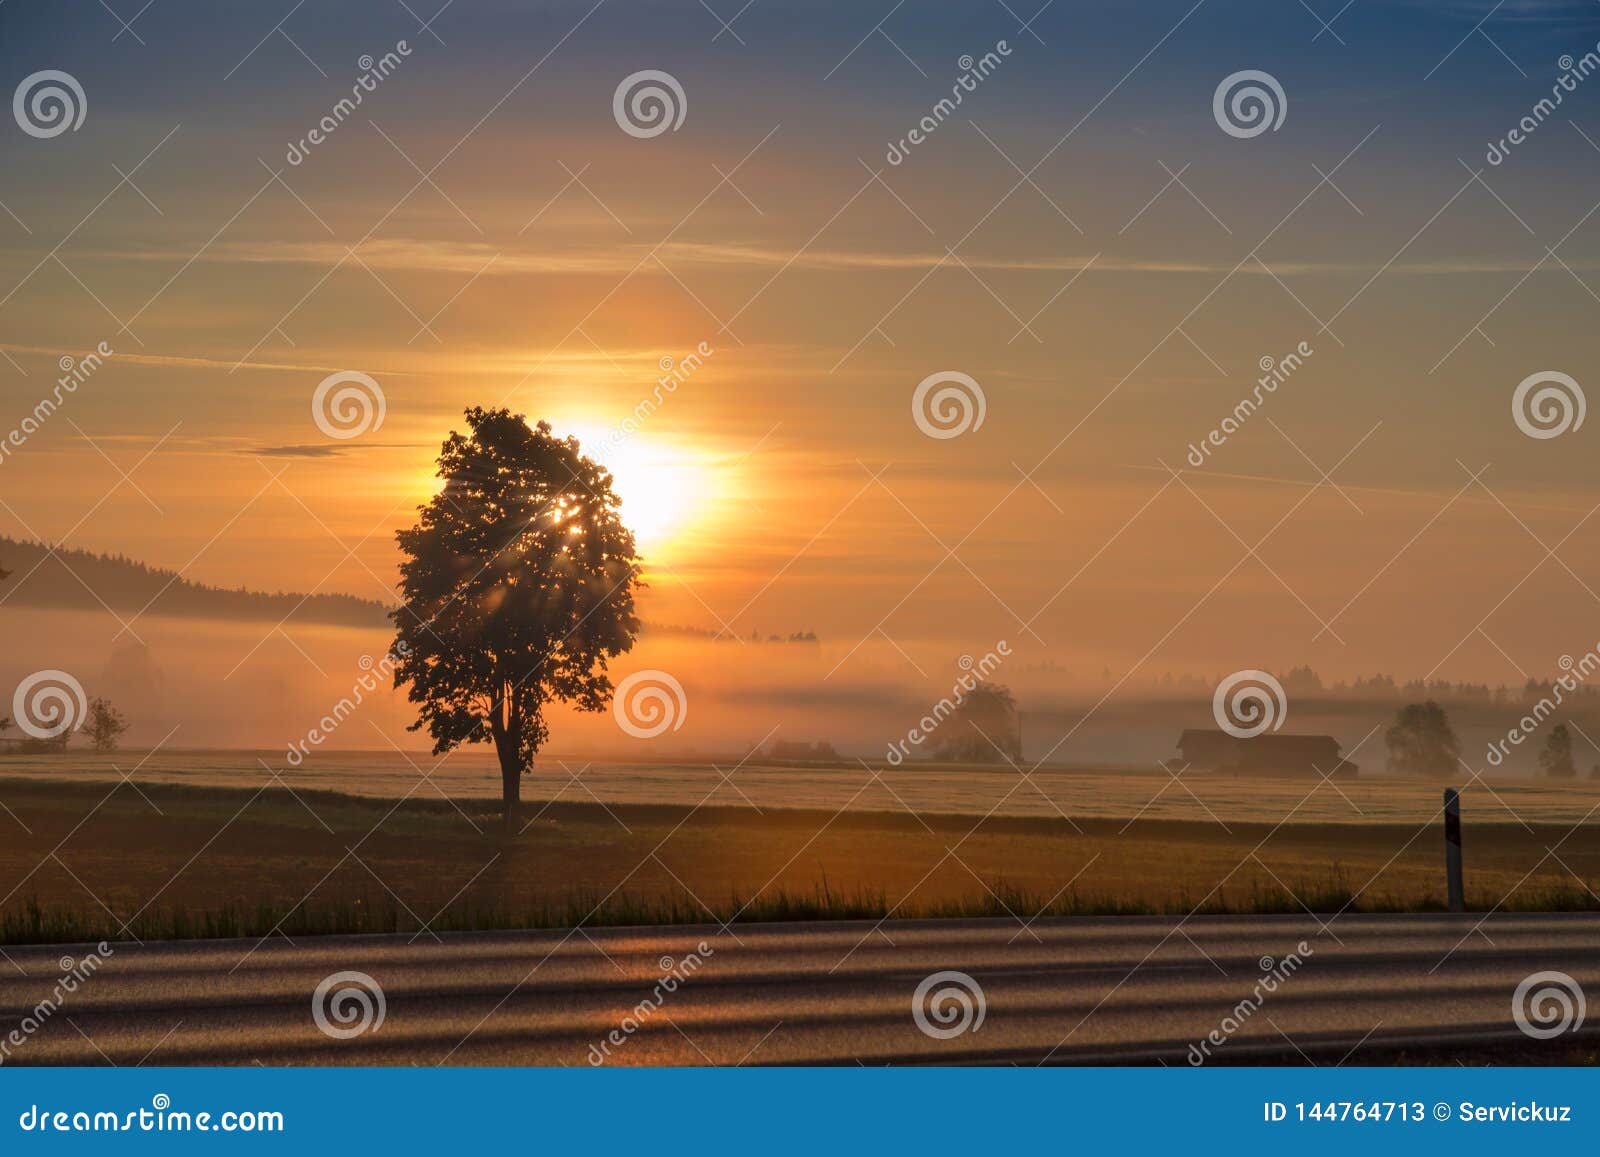 morning dawning sun over hazy field and country road